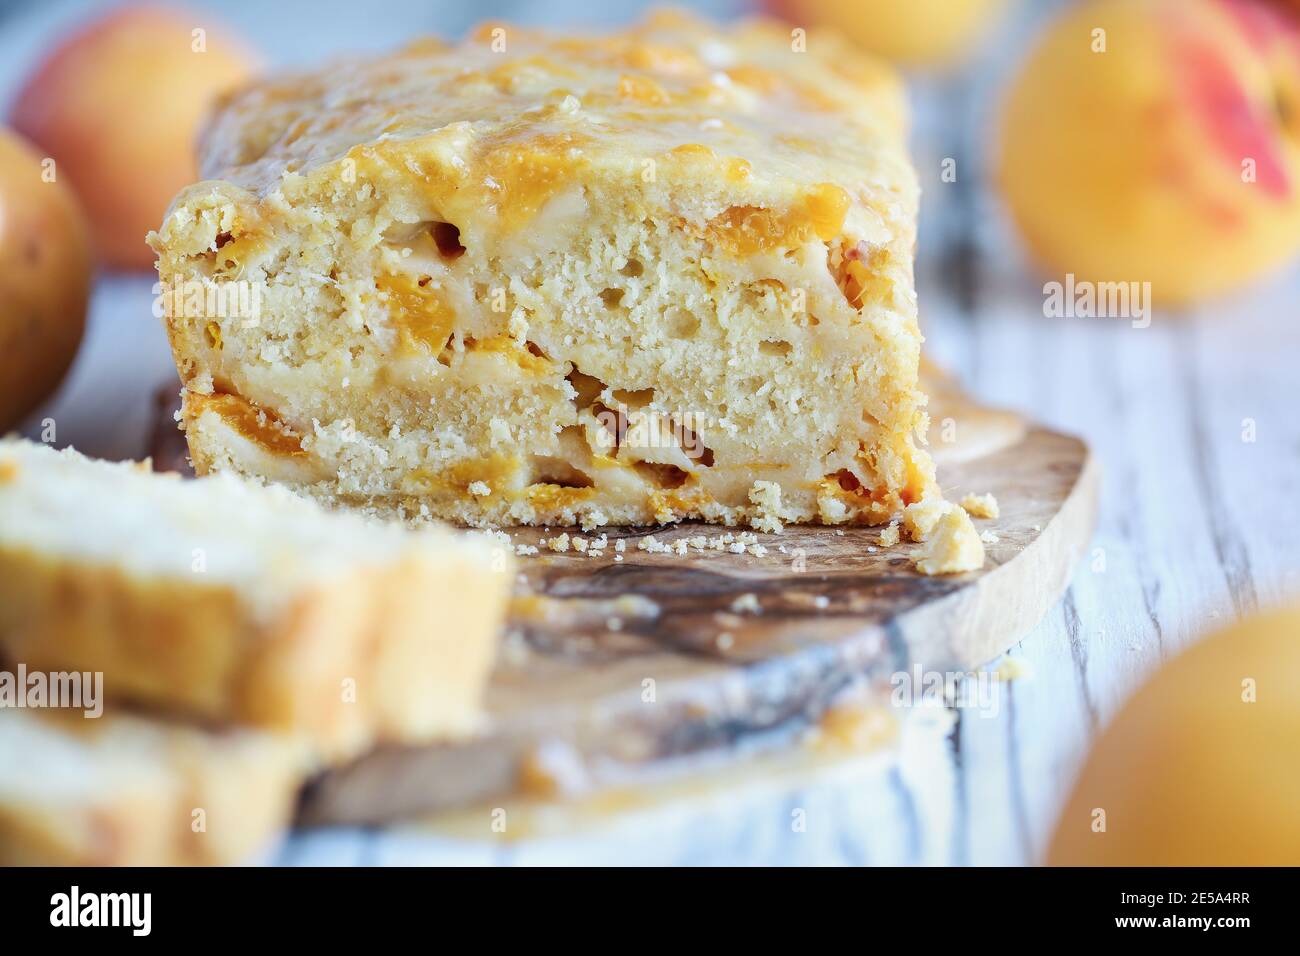 Delicious homemade peach sweet bread with frosting and fresh peaches. Selective focus with blurred foreground and background. Stock Photo